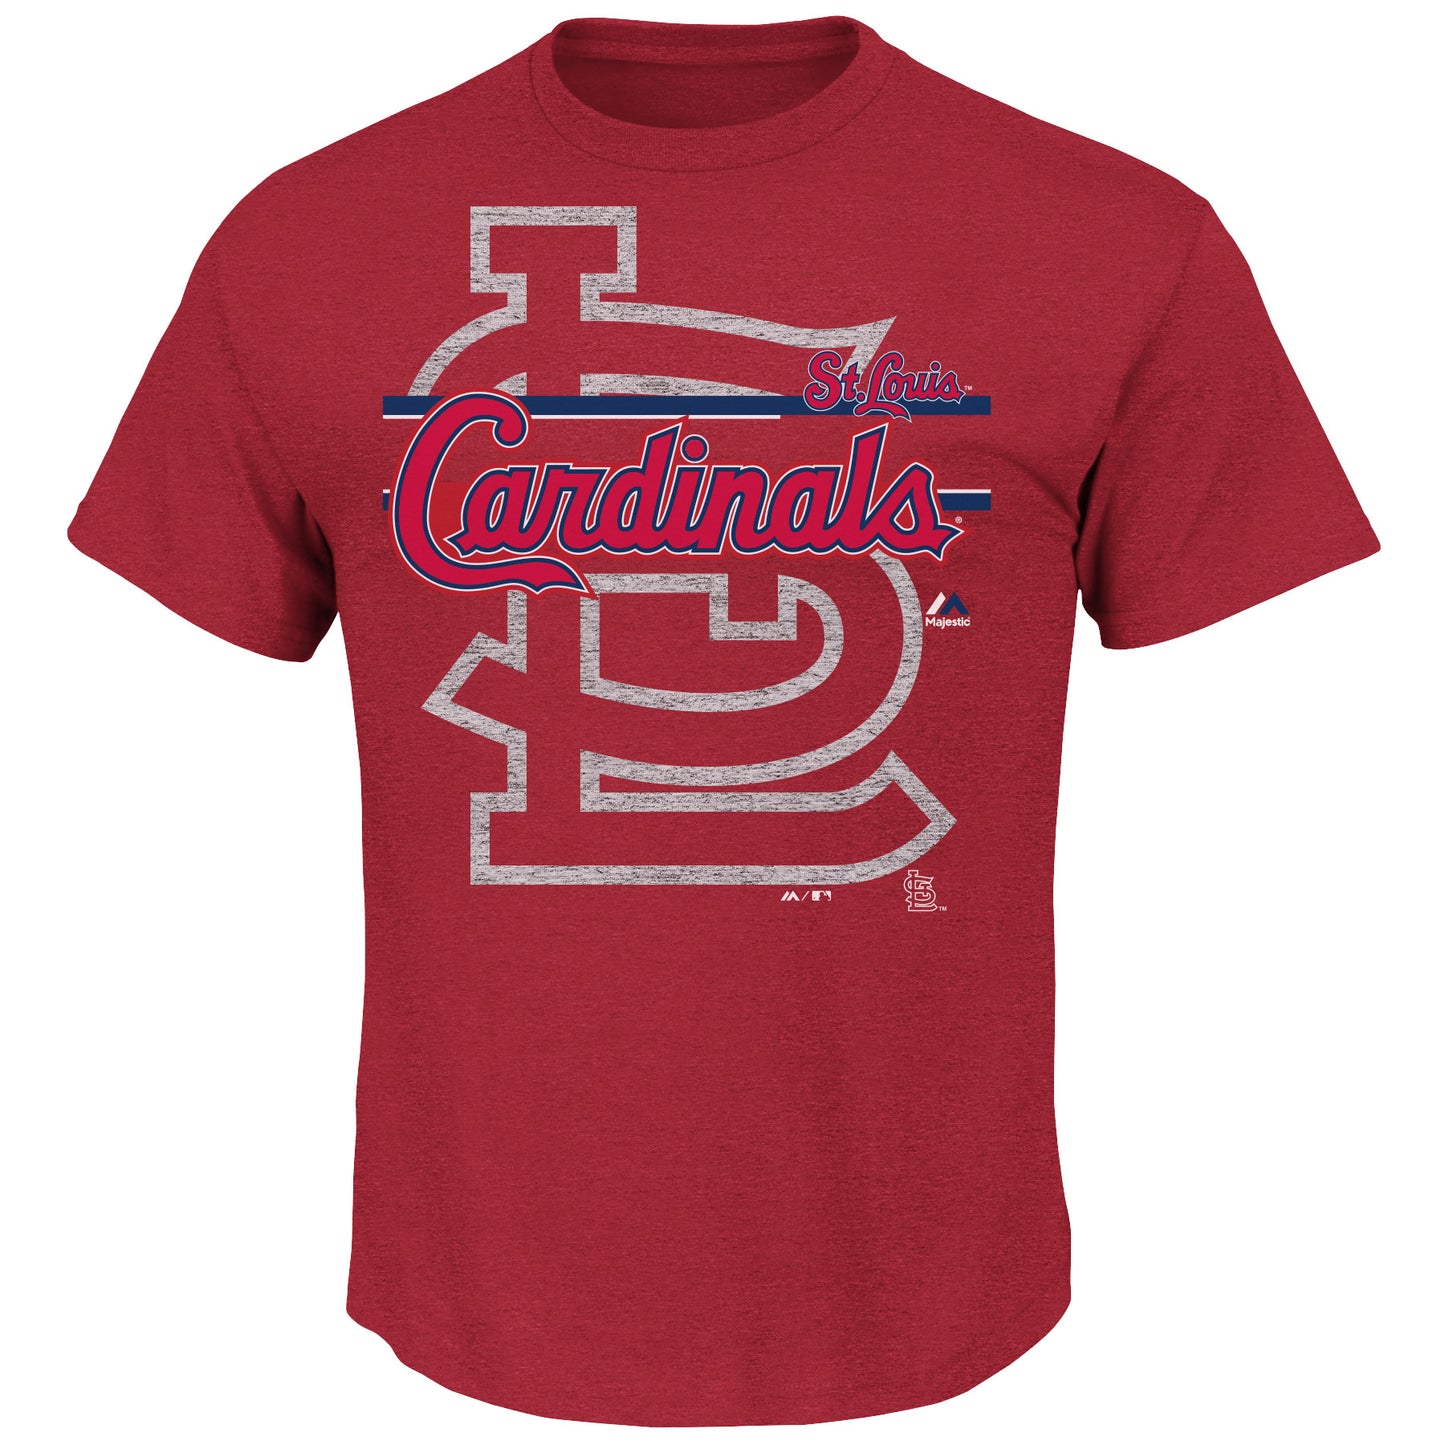 St. Louis Cardinals Rise to Victory T-shirt by Majestic